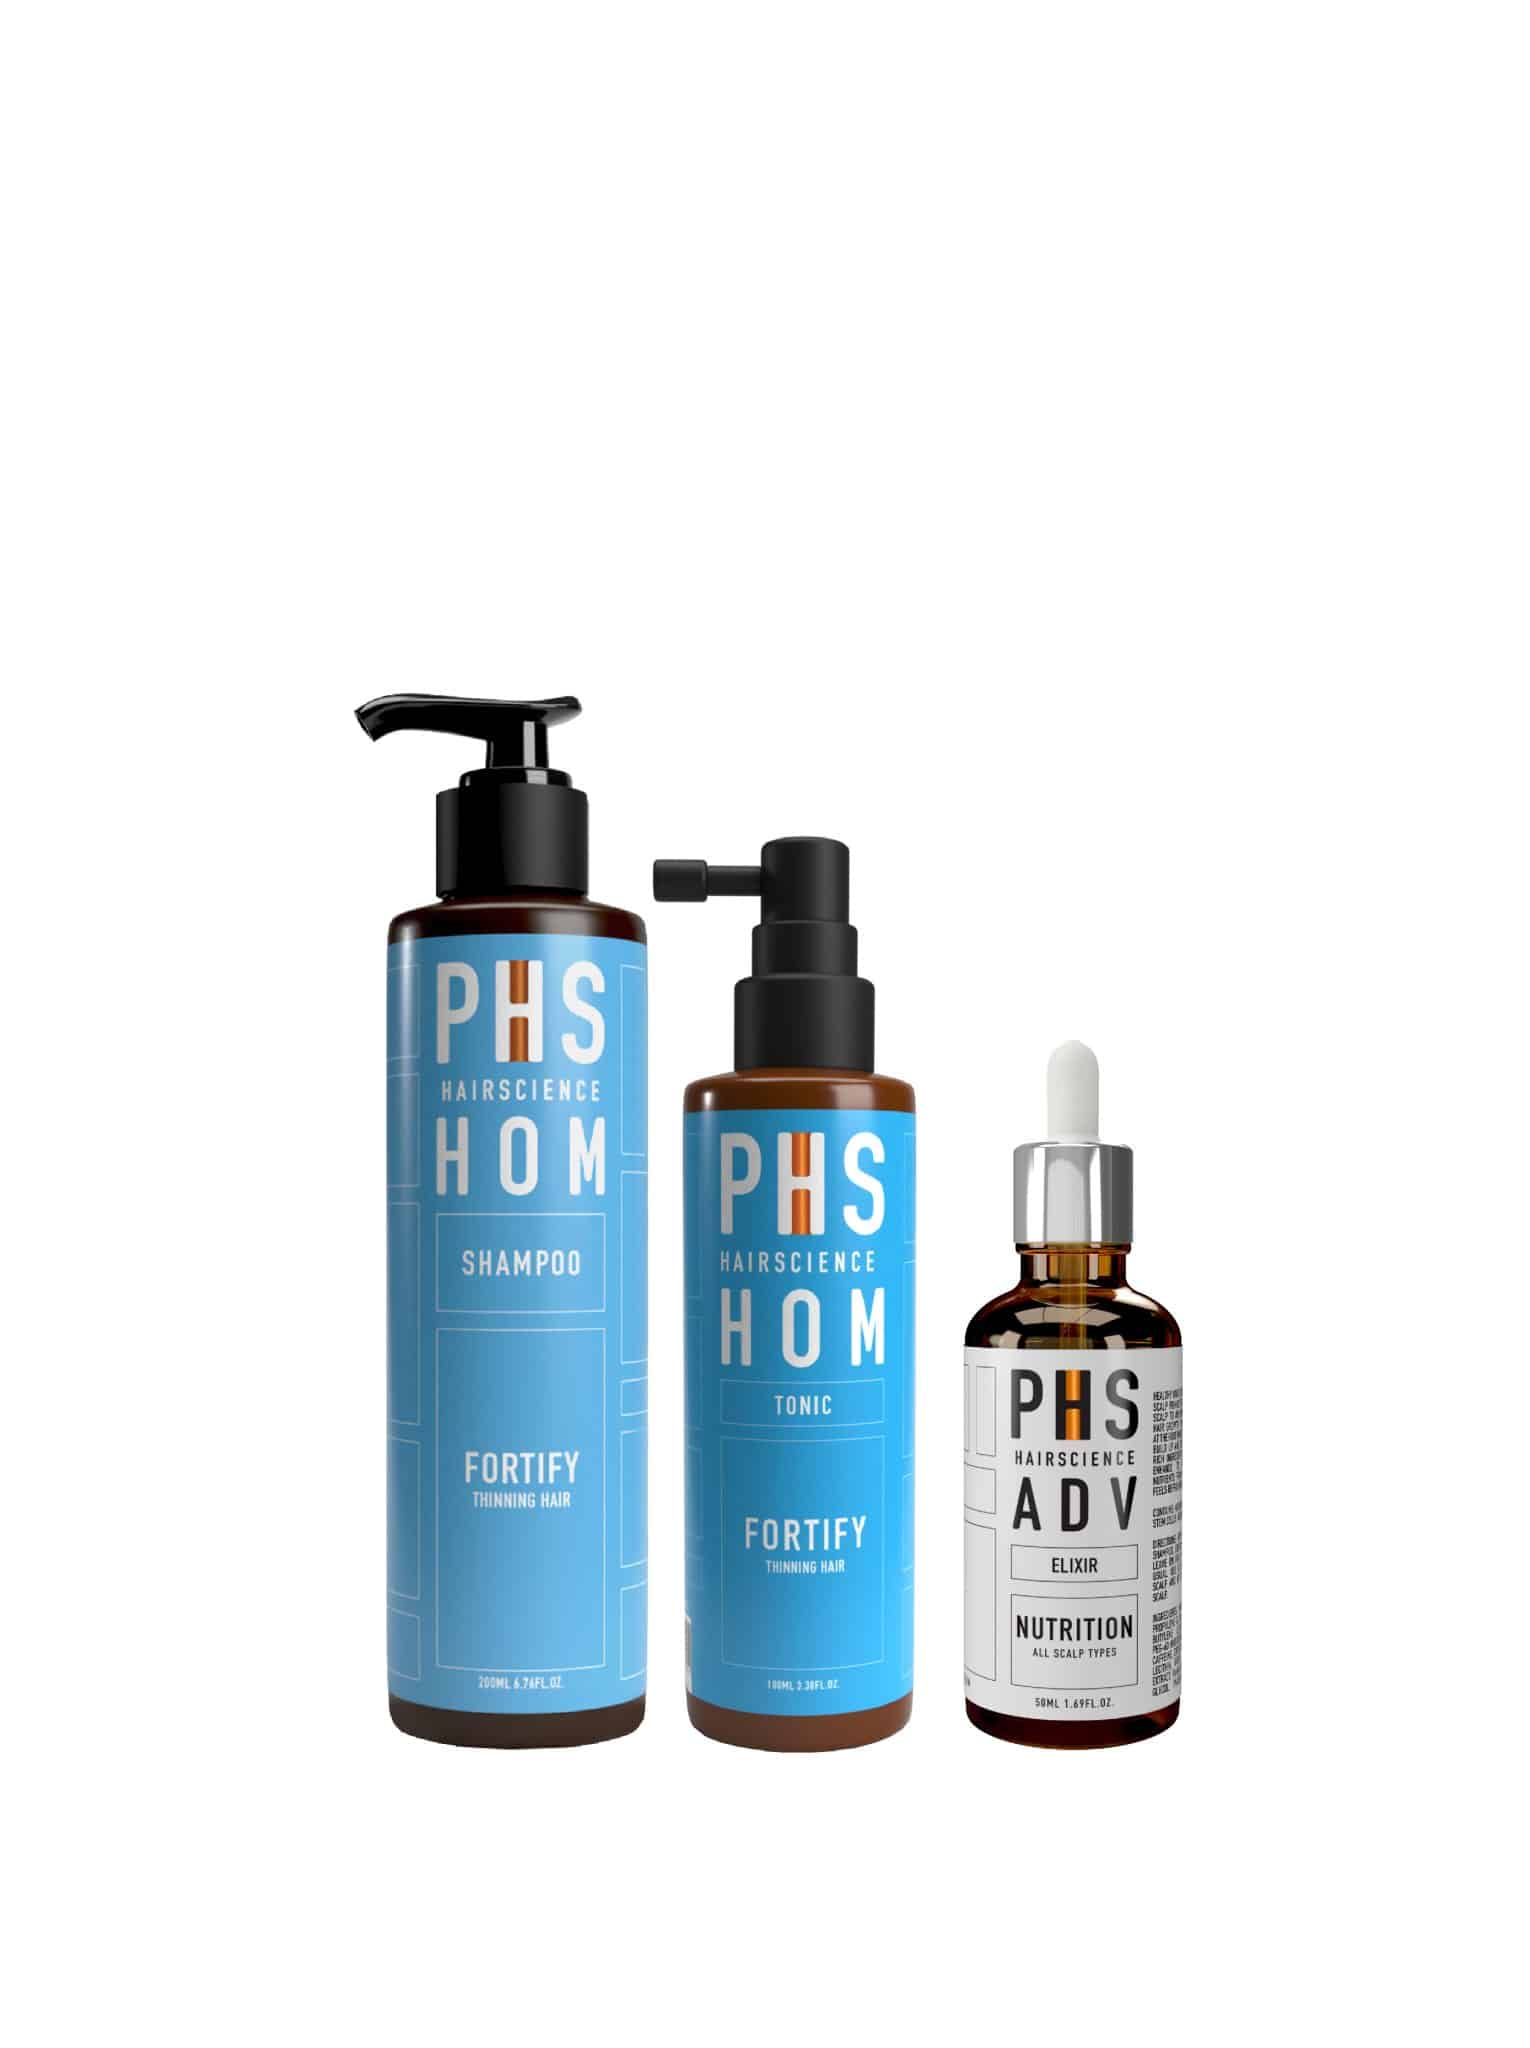 HOM Fortify Bundle Kit | For Mild Male Hair Loss | PHS HAIRSCIENCE®